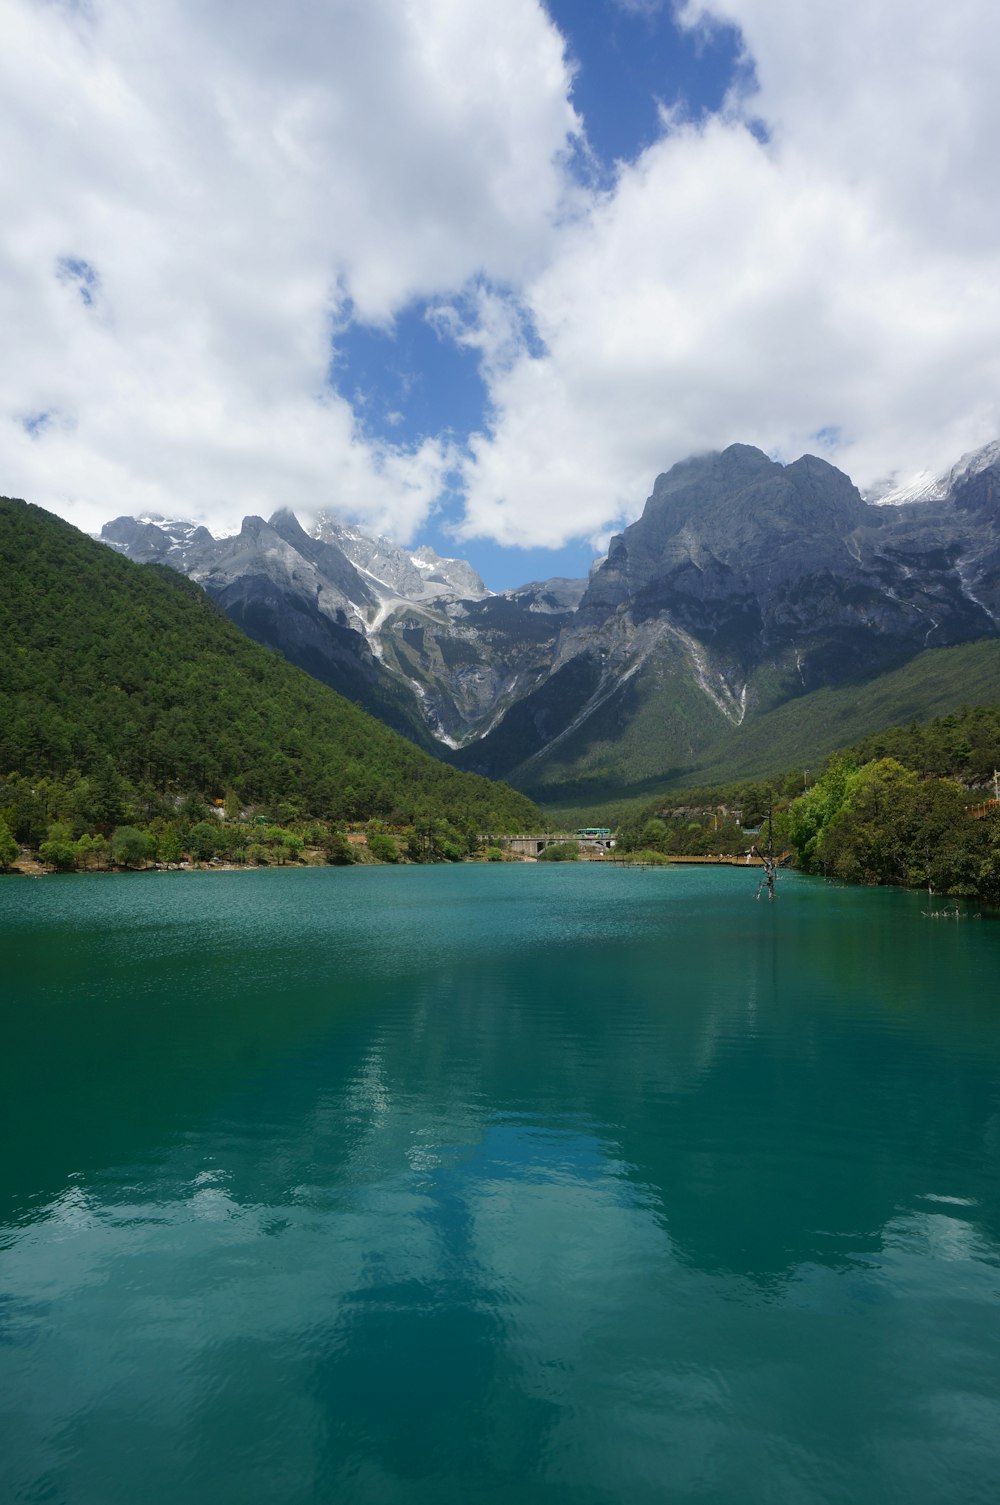 green lake surrounded by green trees and mountains under blue sky and white clouds during daytime